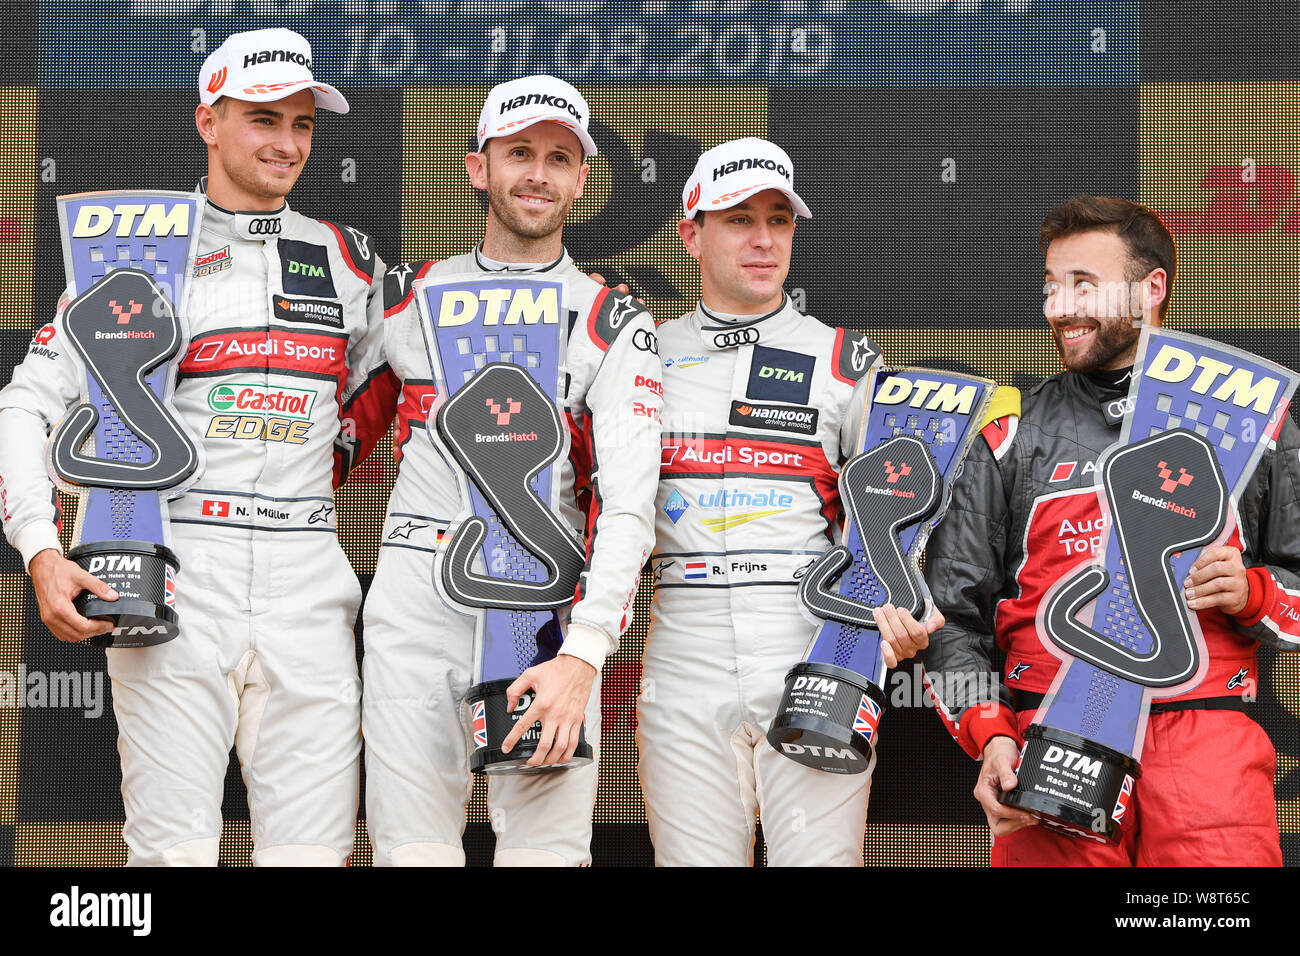 Kent, UK. 11th August 2019. René Rast (Audi Sport Team Rosberg) (centre), Nico Müller (Audi Sport Team Abt Sportsline) (left) and Robin Frijns (Audi Sport Team Abt Sportsline)  (right) at the winner’s presentation during DTM Race 2 of the DTM (German Touring Cars) and W Series at Brands Hatch GP Circuit on Sunday, August 11, 2019 in KENT, ENGLAND. Credit: Taka G Wu/Alamy Live News Credit: Taka Wu/Alamy Live News Stock Photo